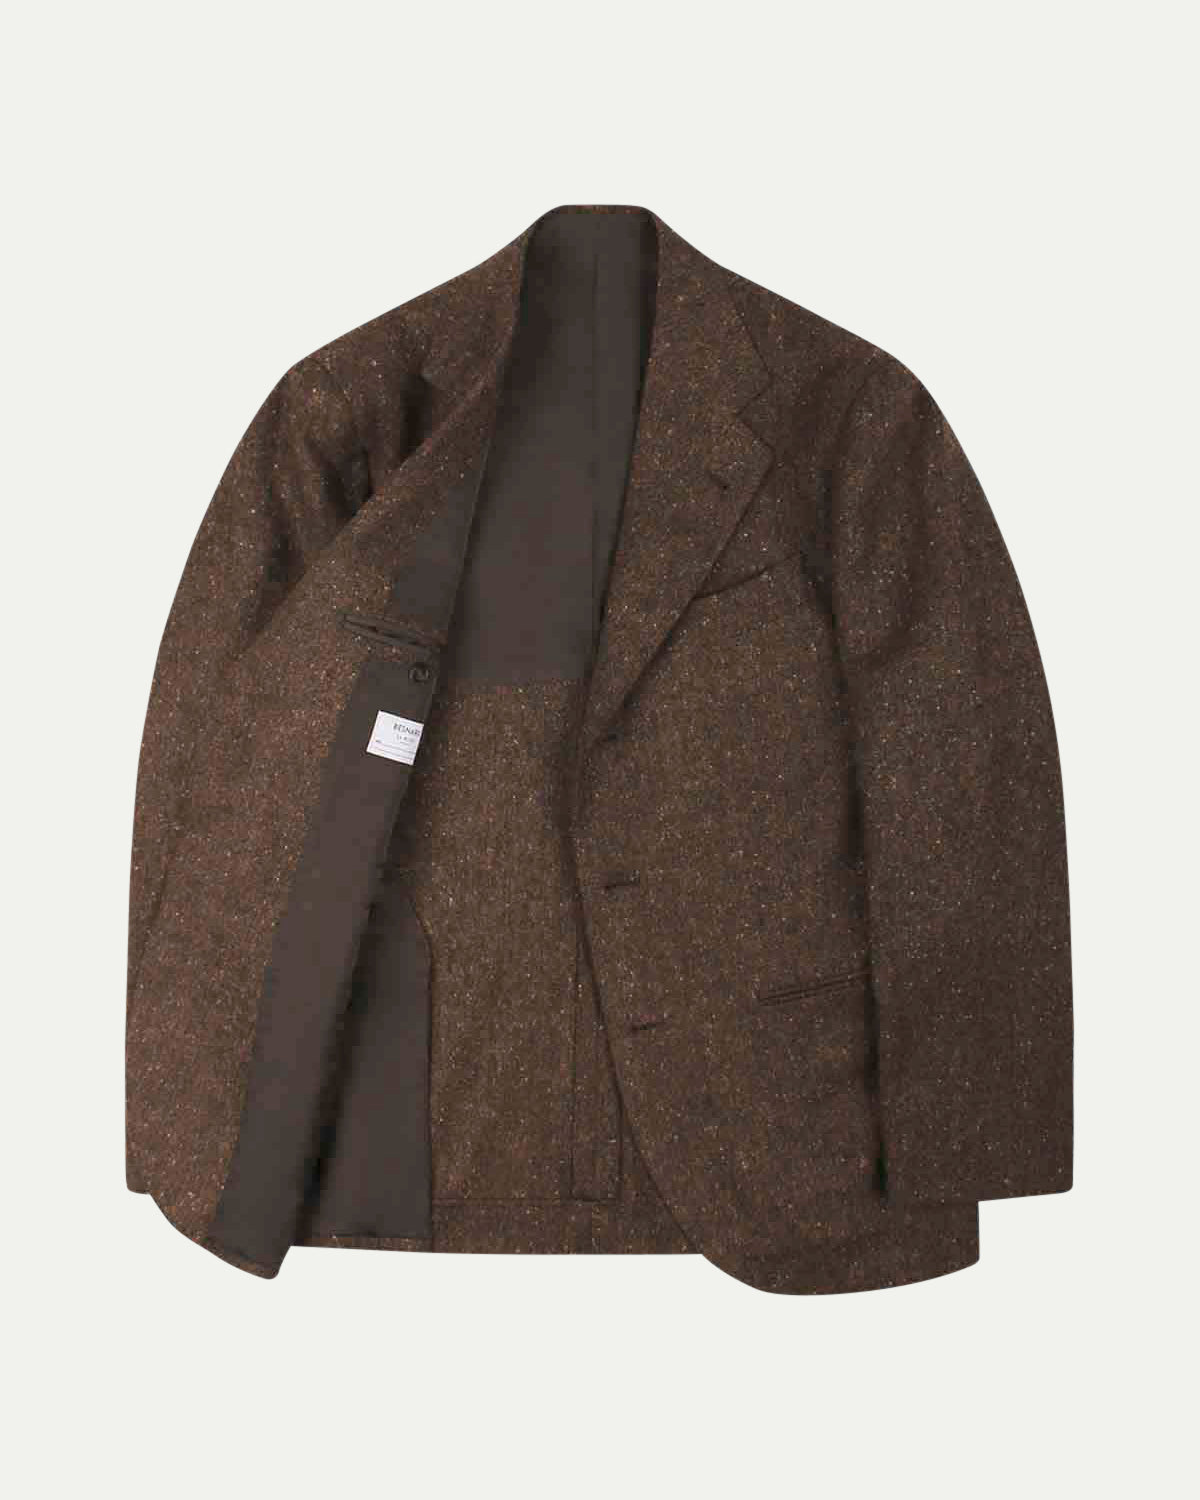 Made-To-Order Sport Coat Brown Donegal Tweed